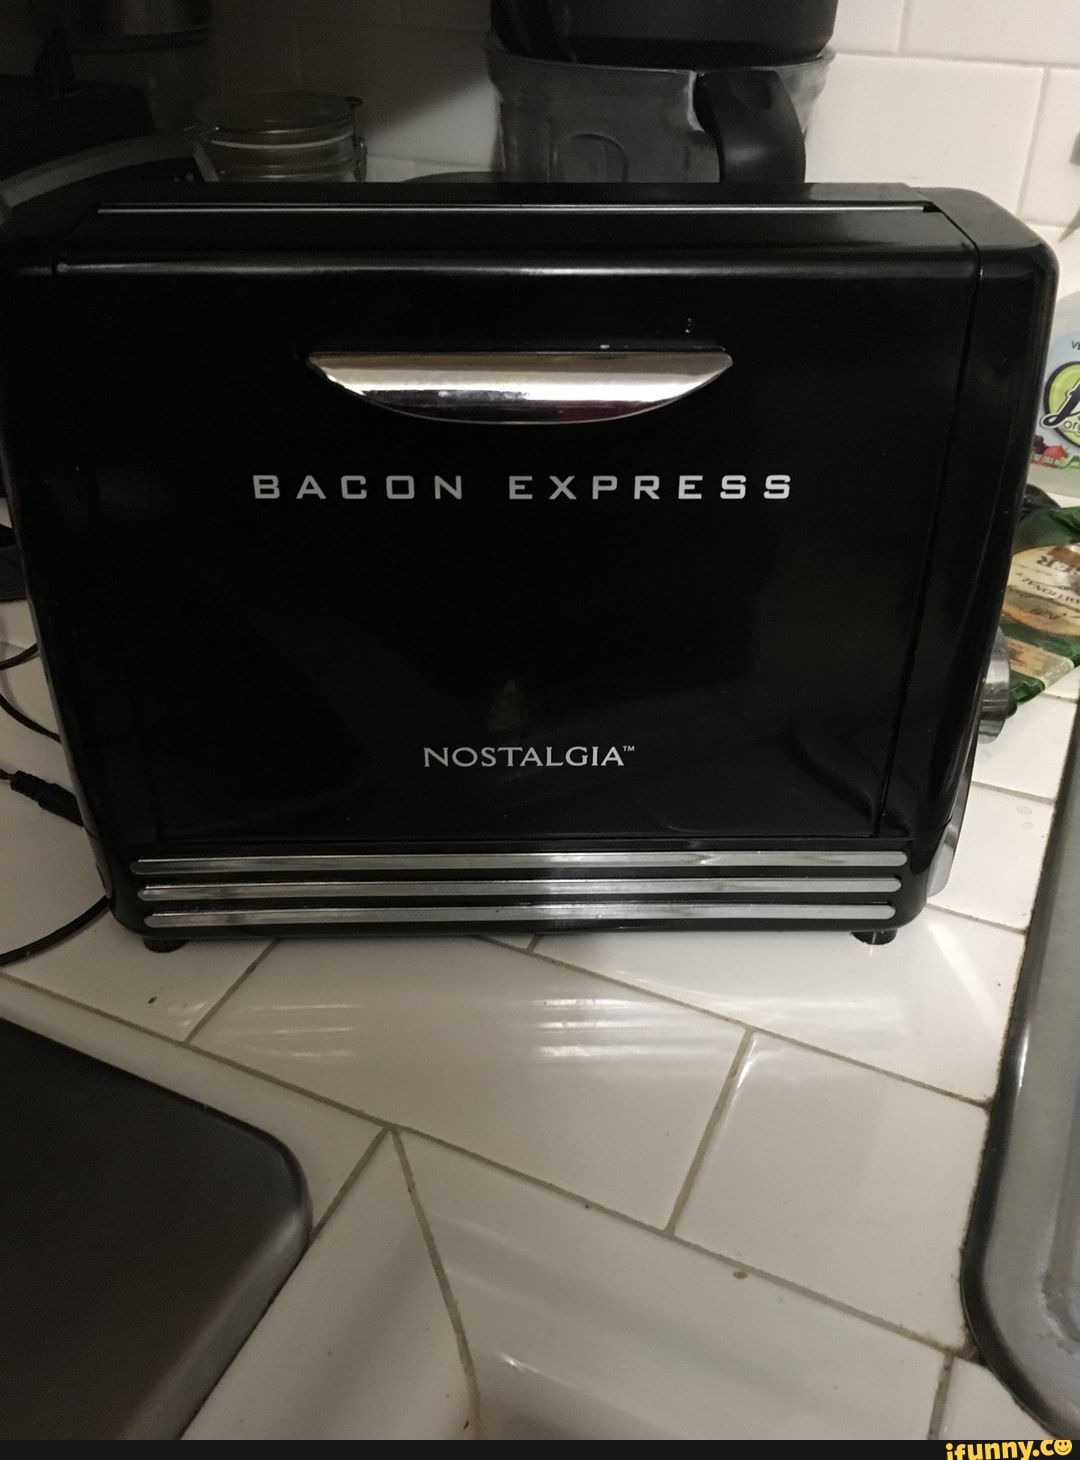 I wanted to eat more bacon. They make a bacon toaster. - BACON EXPRESS  NOSTALGIA - iFunny Brazil